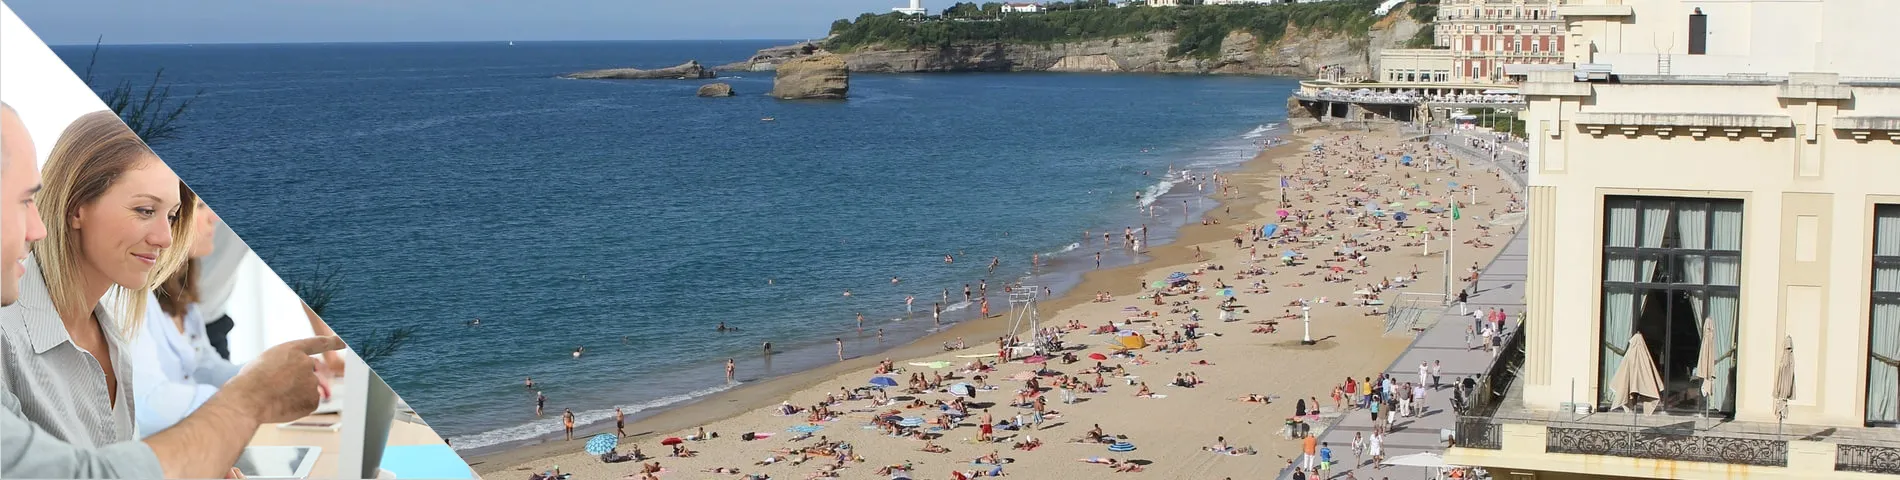 Biarritz - Students aged 30+